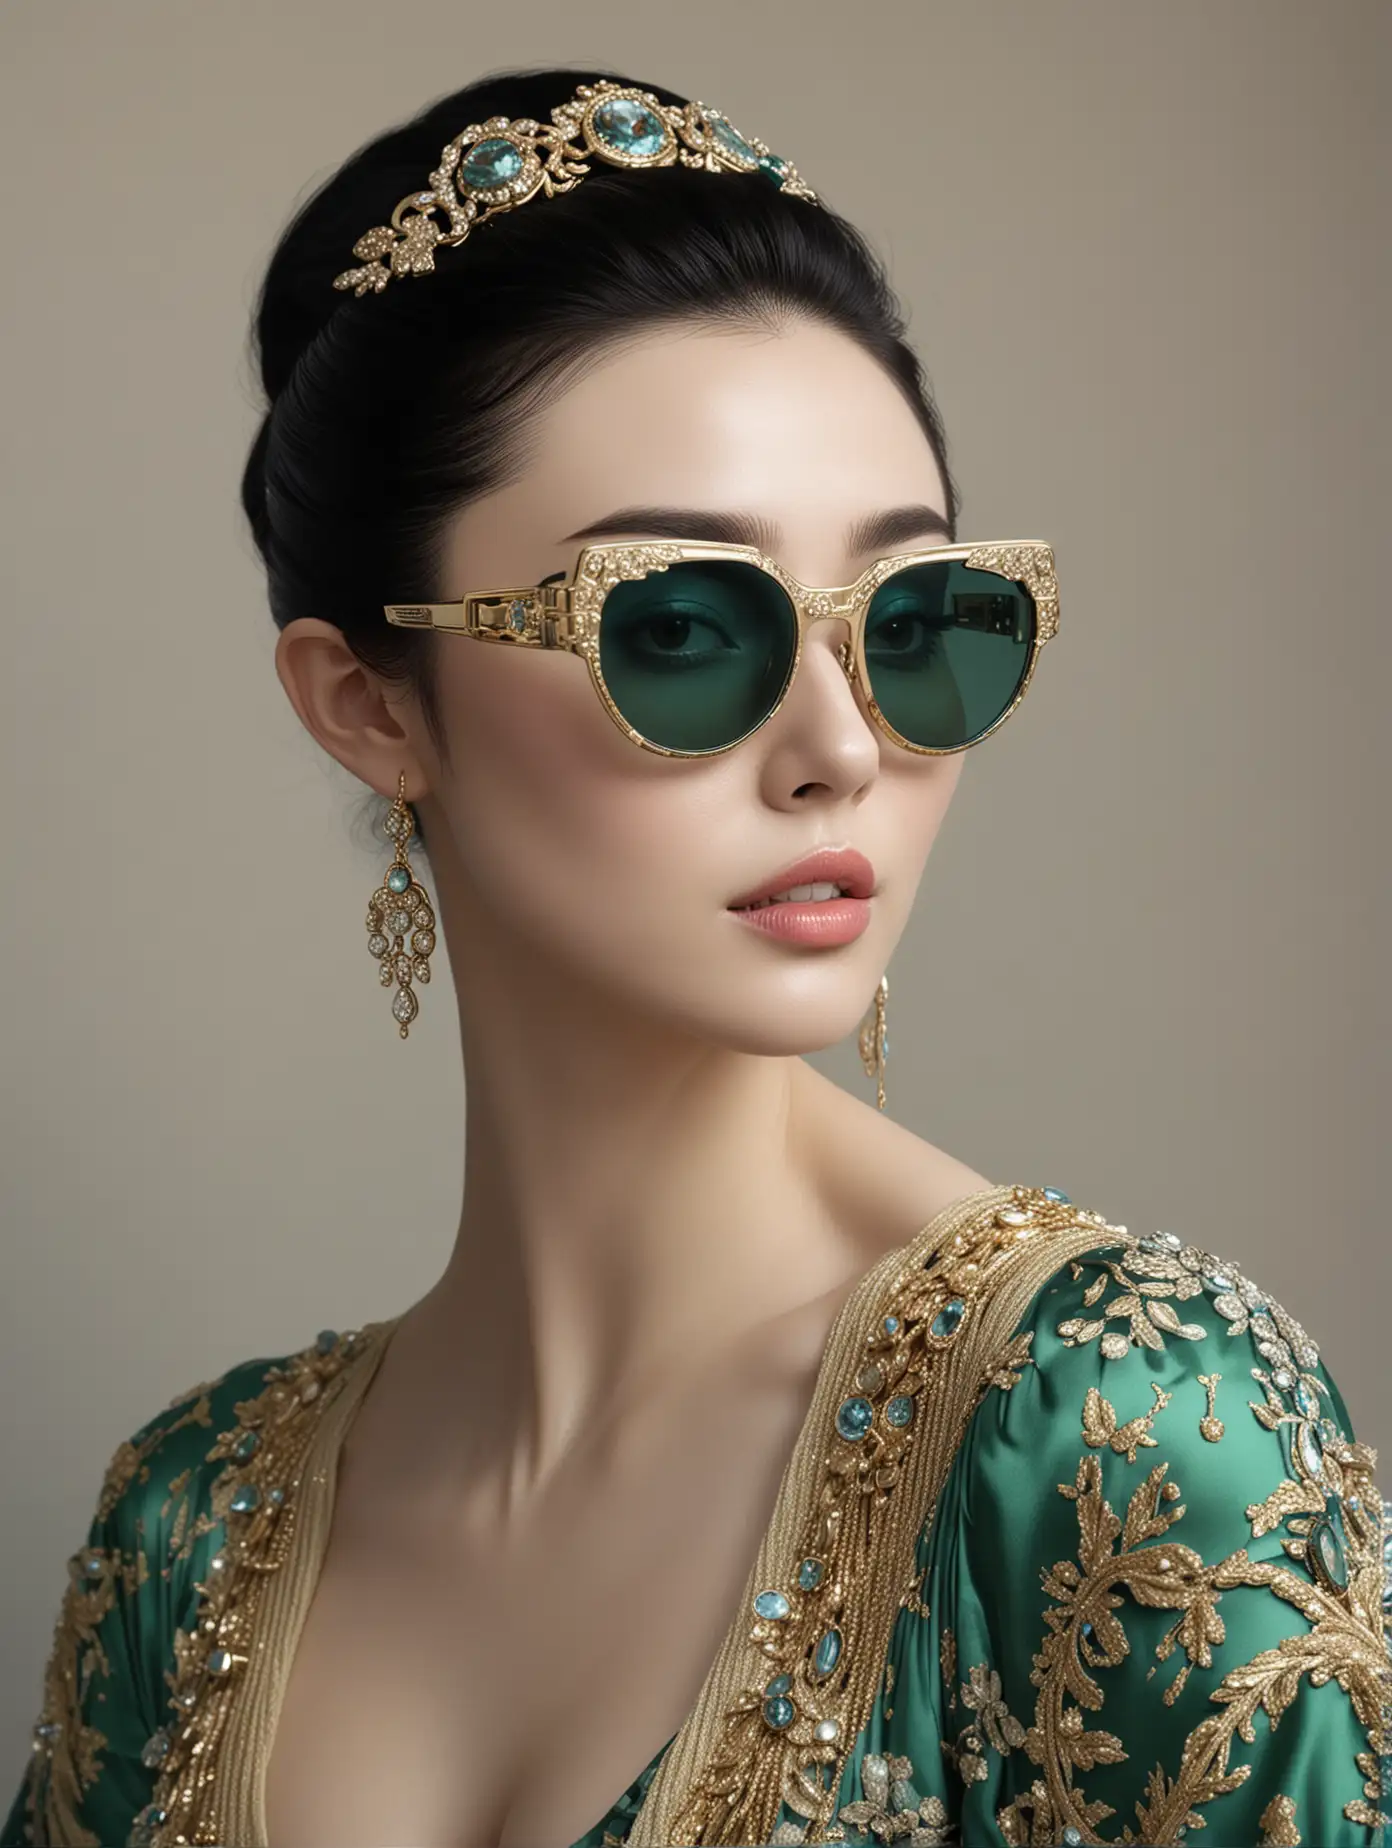 Glamorous Fan Bingbing in GucciInspired High Fashion with Aurora Australis Sunglasses and Wearable Tech